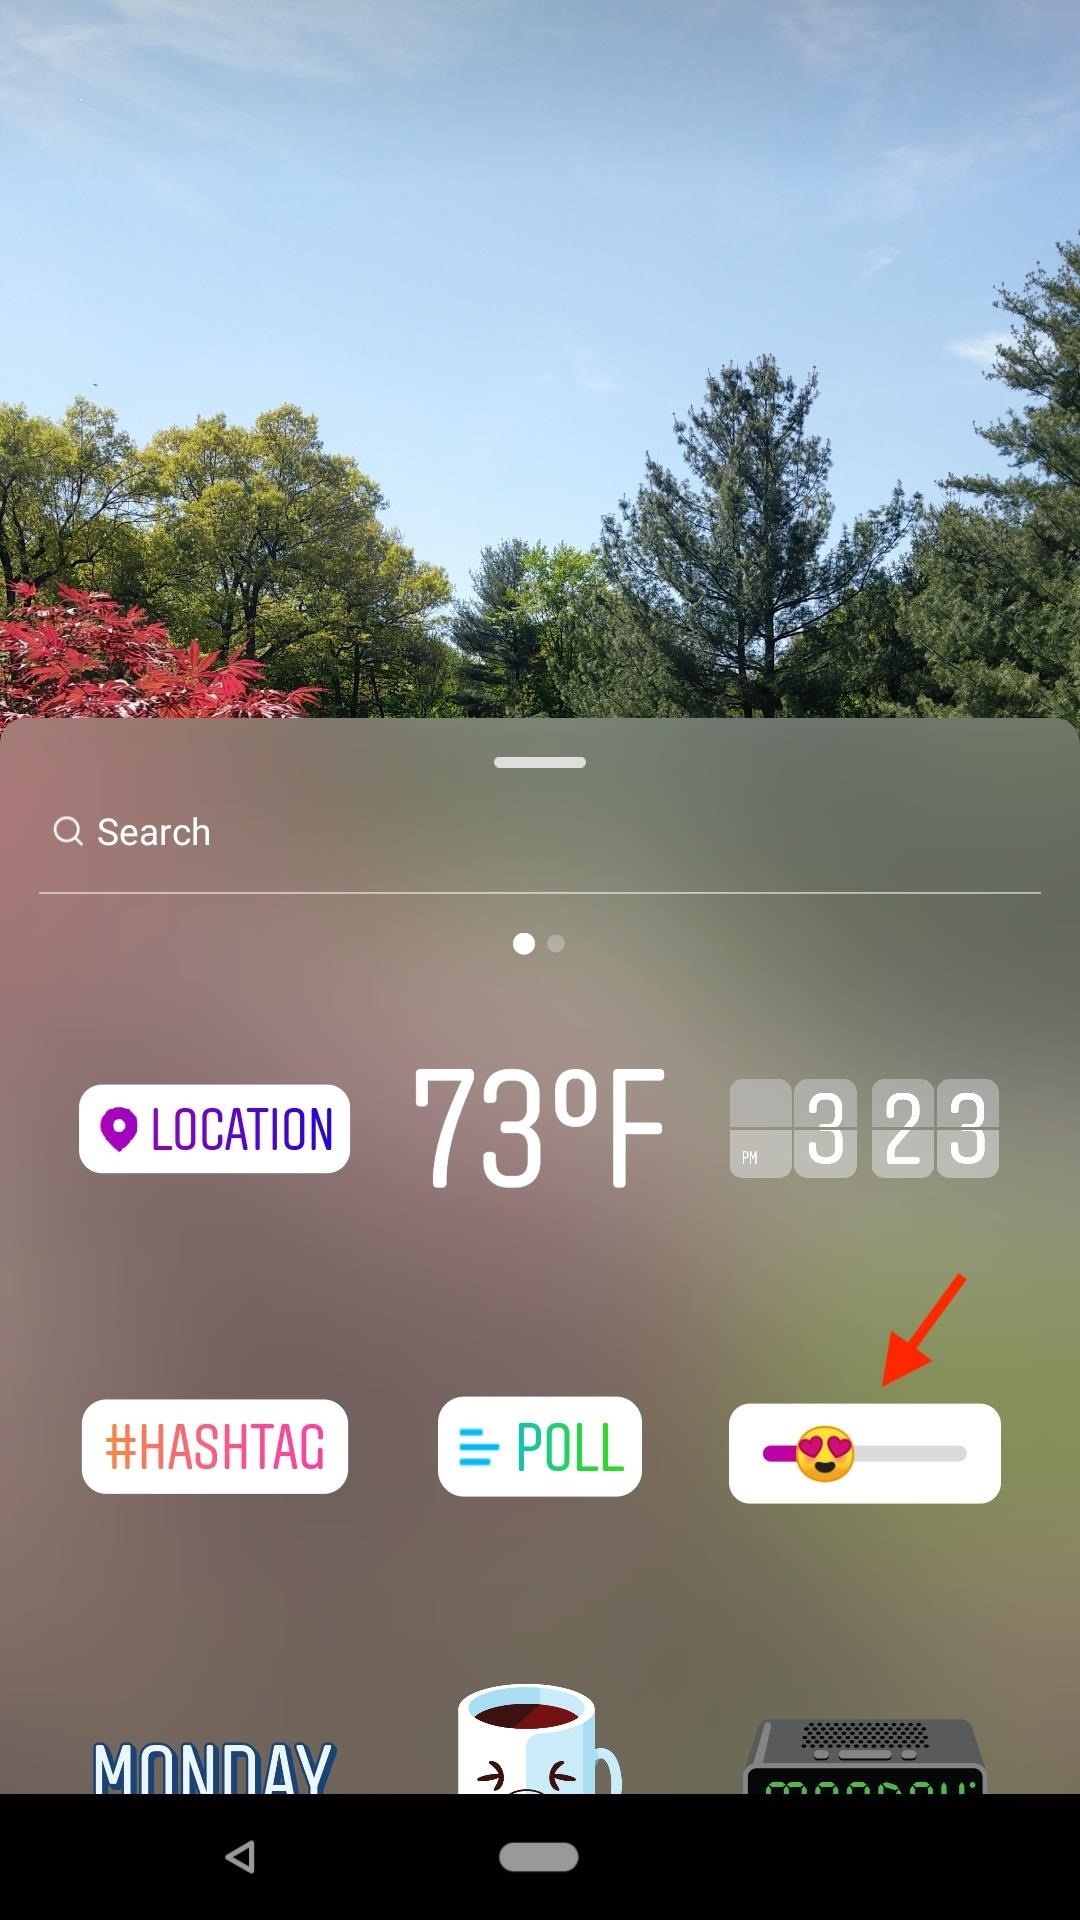 Instagram 101: How to Create Polls to Get Questions Answered by Followers & Other Users